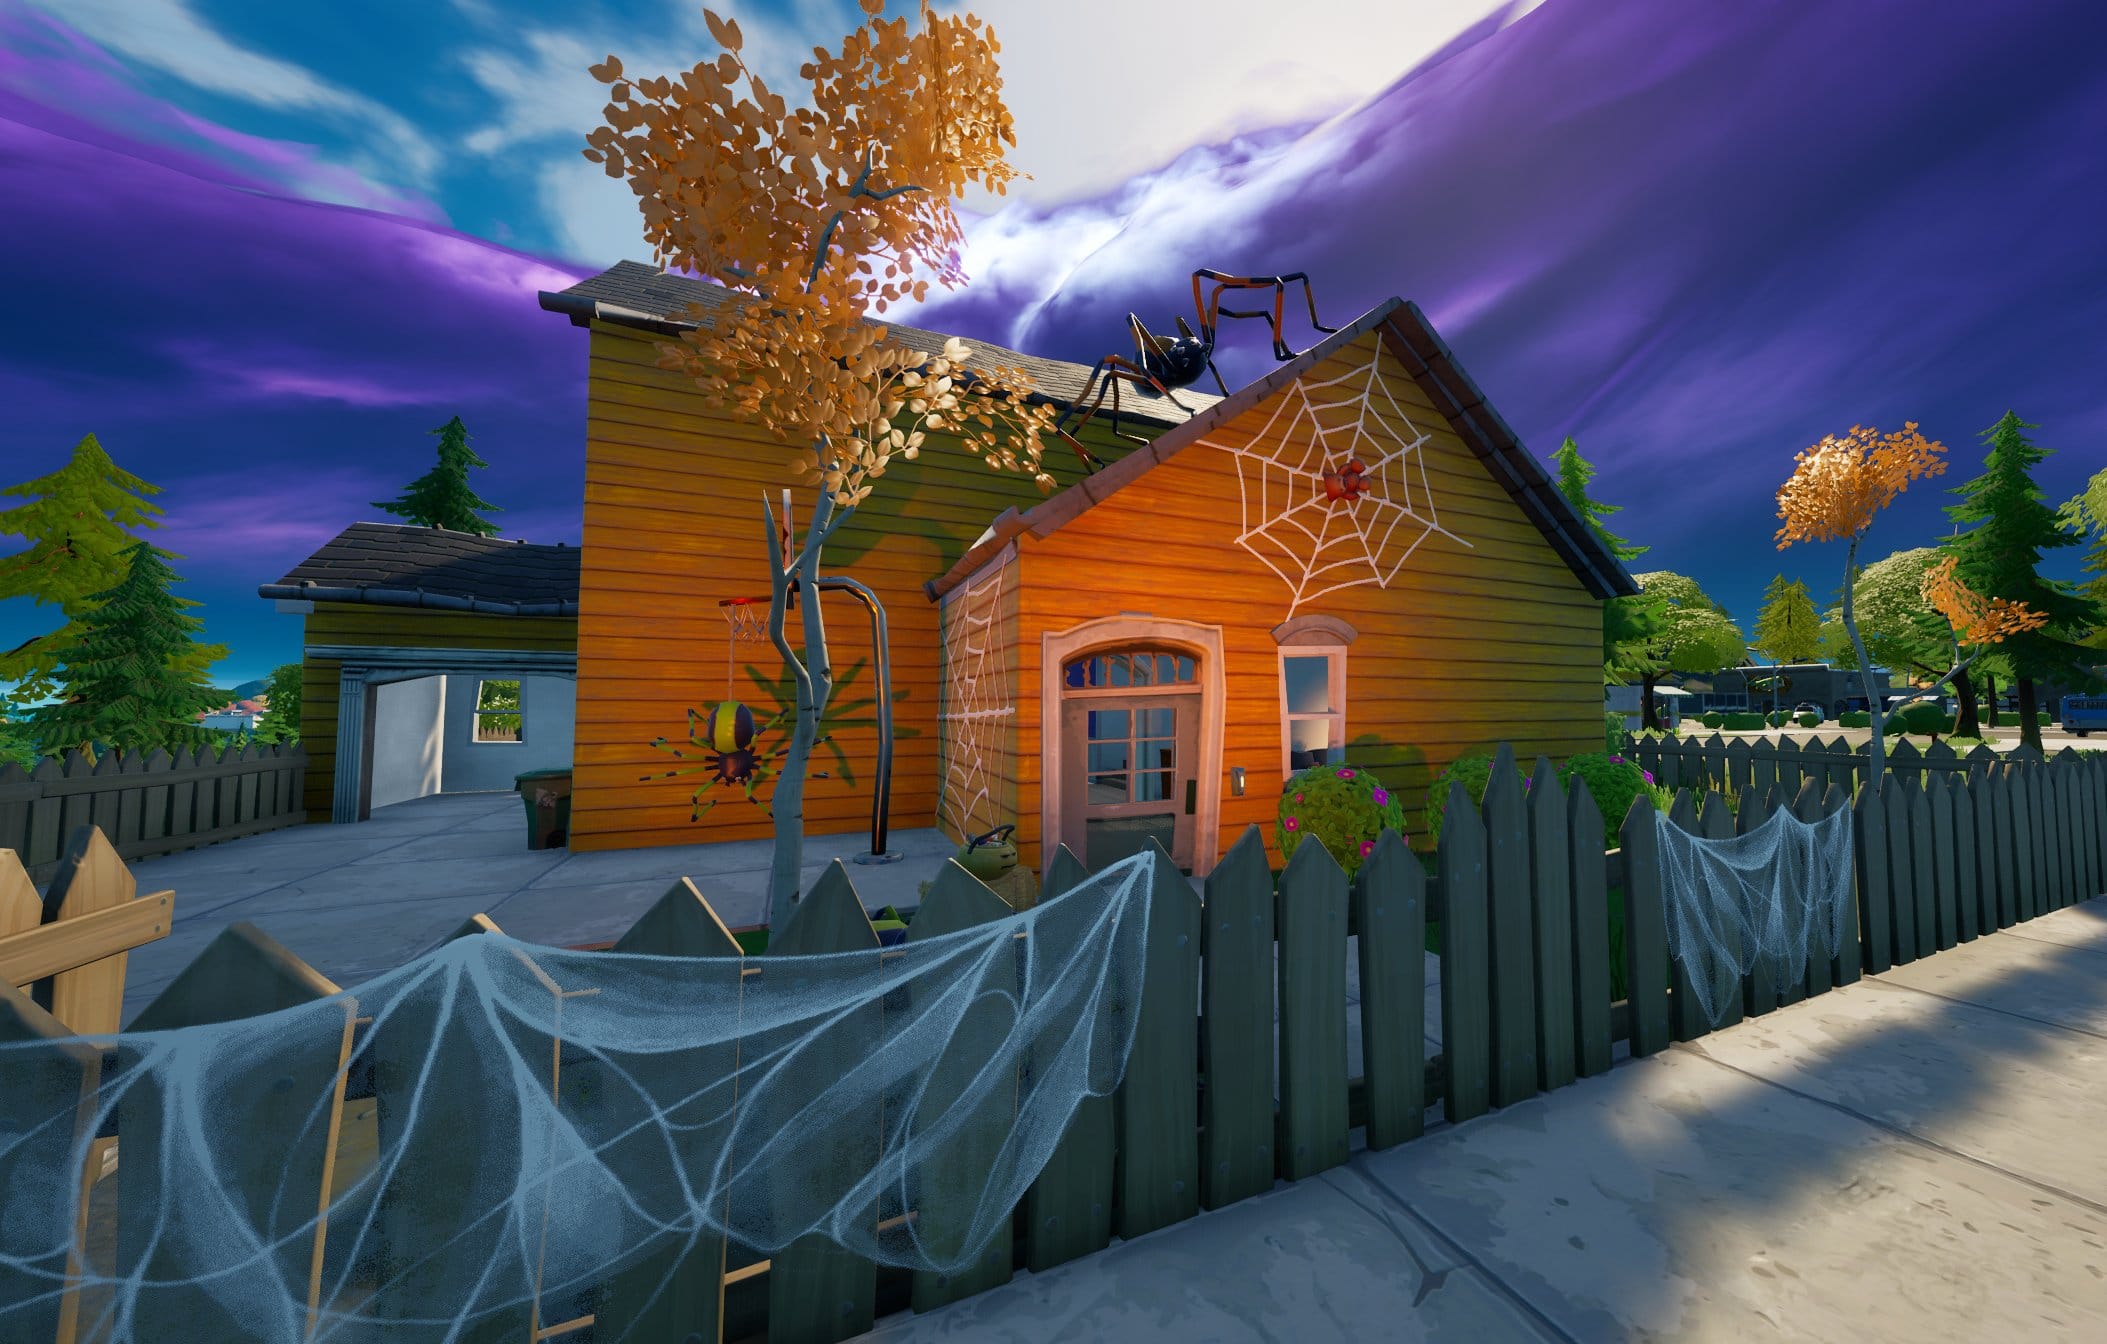 A new location called Cube Town is coming to Fortnite